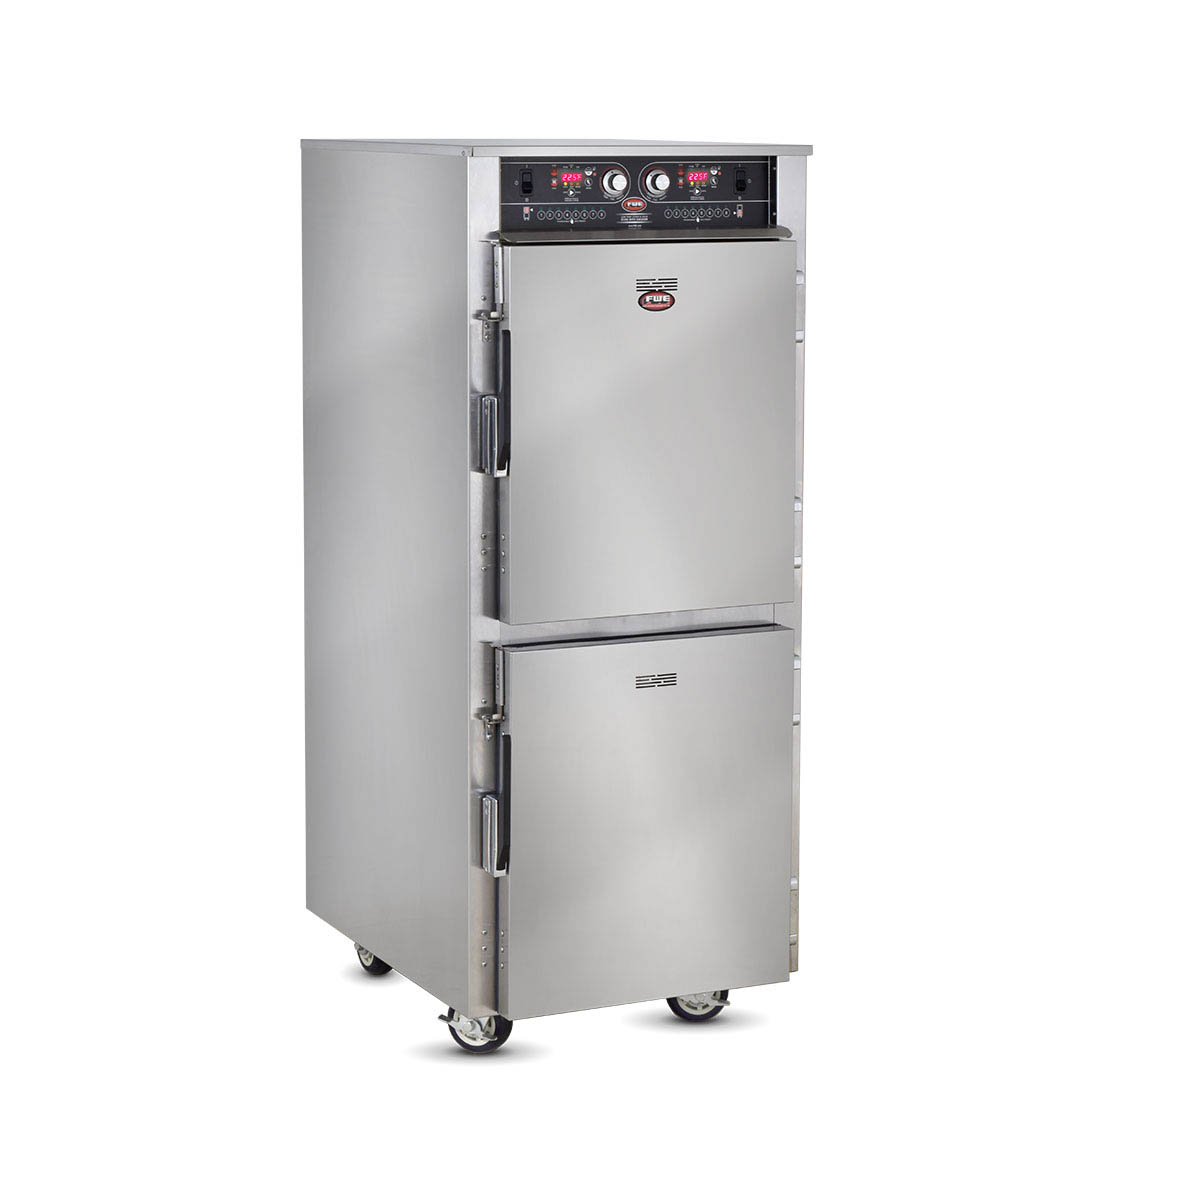 FWE LCH-6-6-SK-G2 Mobile Cook / Hold / Oven Cabinet w/ Thermostatic Controls, Full-Height